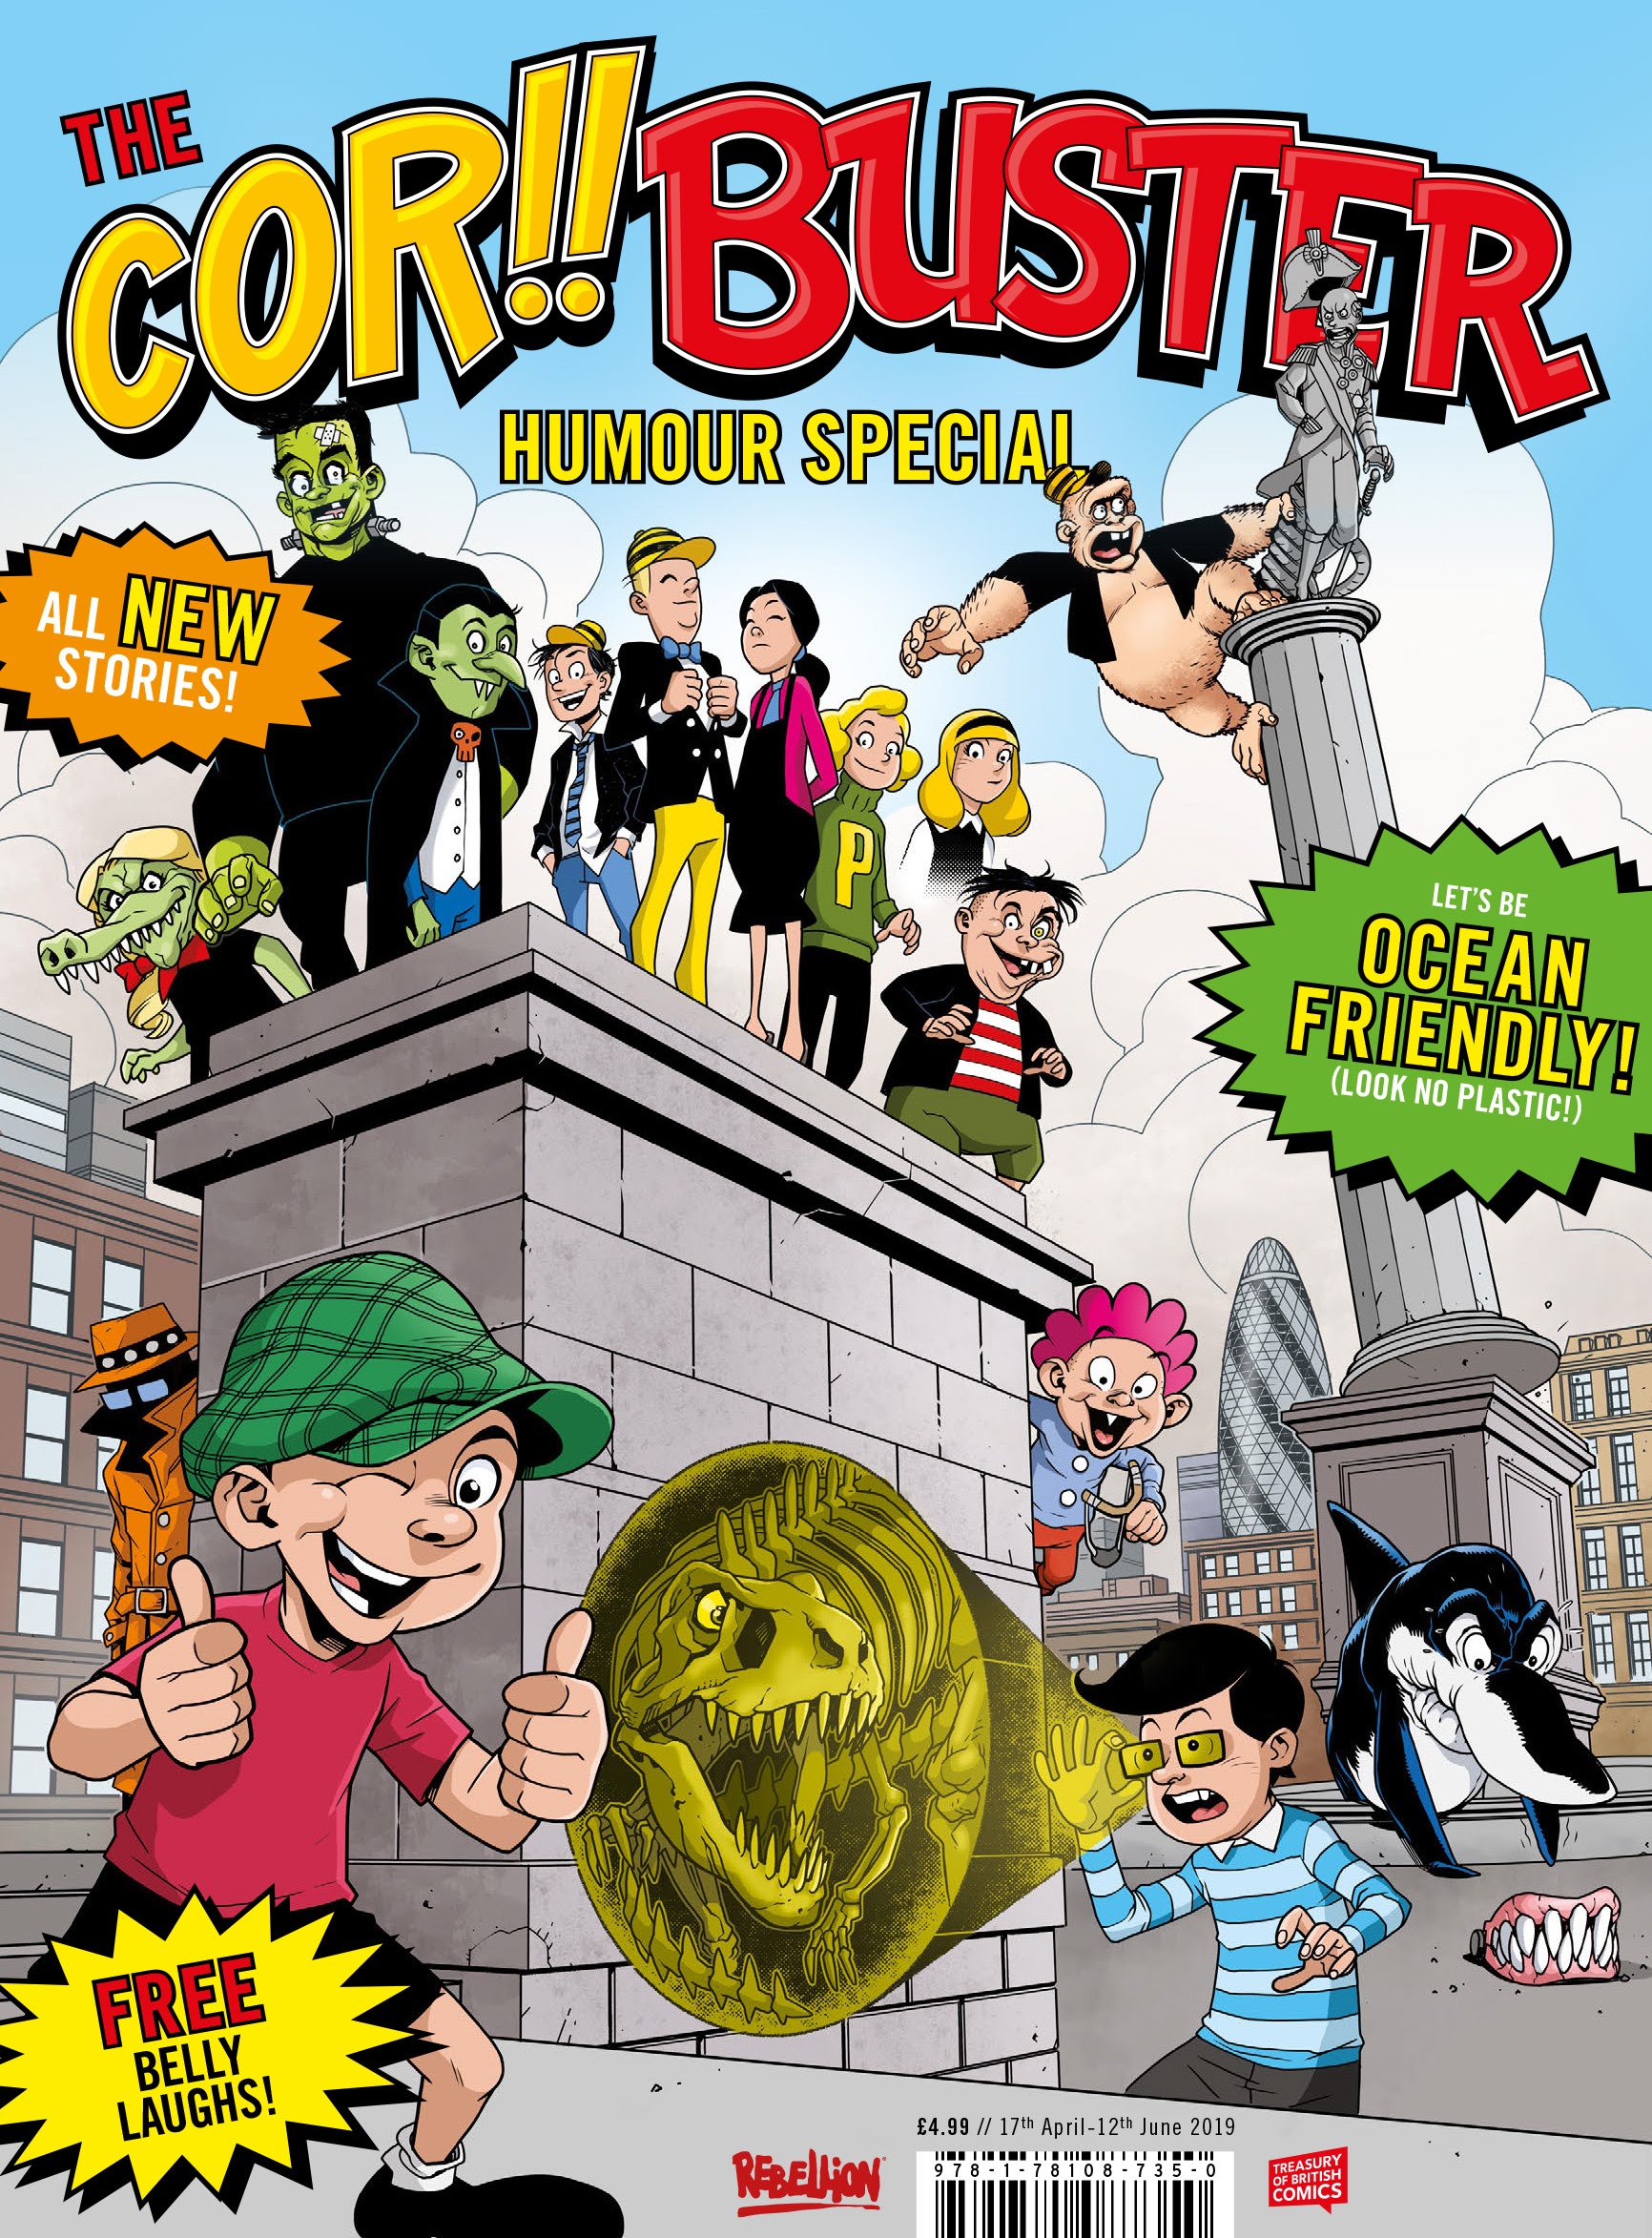 Read online The Cor!! Buster Humour Special comic -  Issue # Full - 1